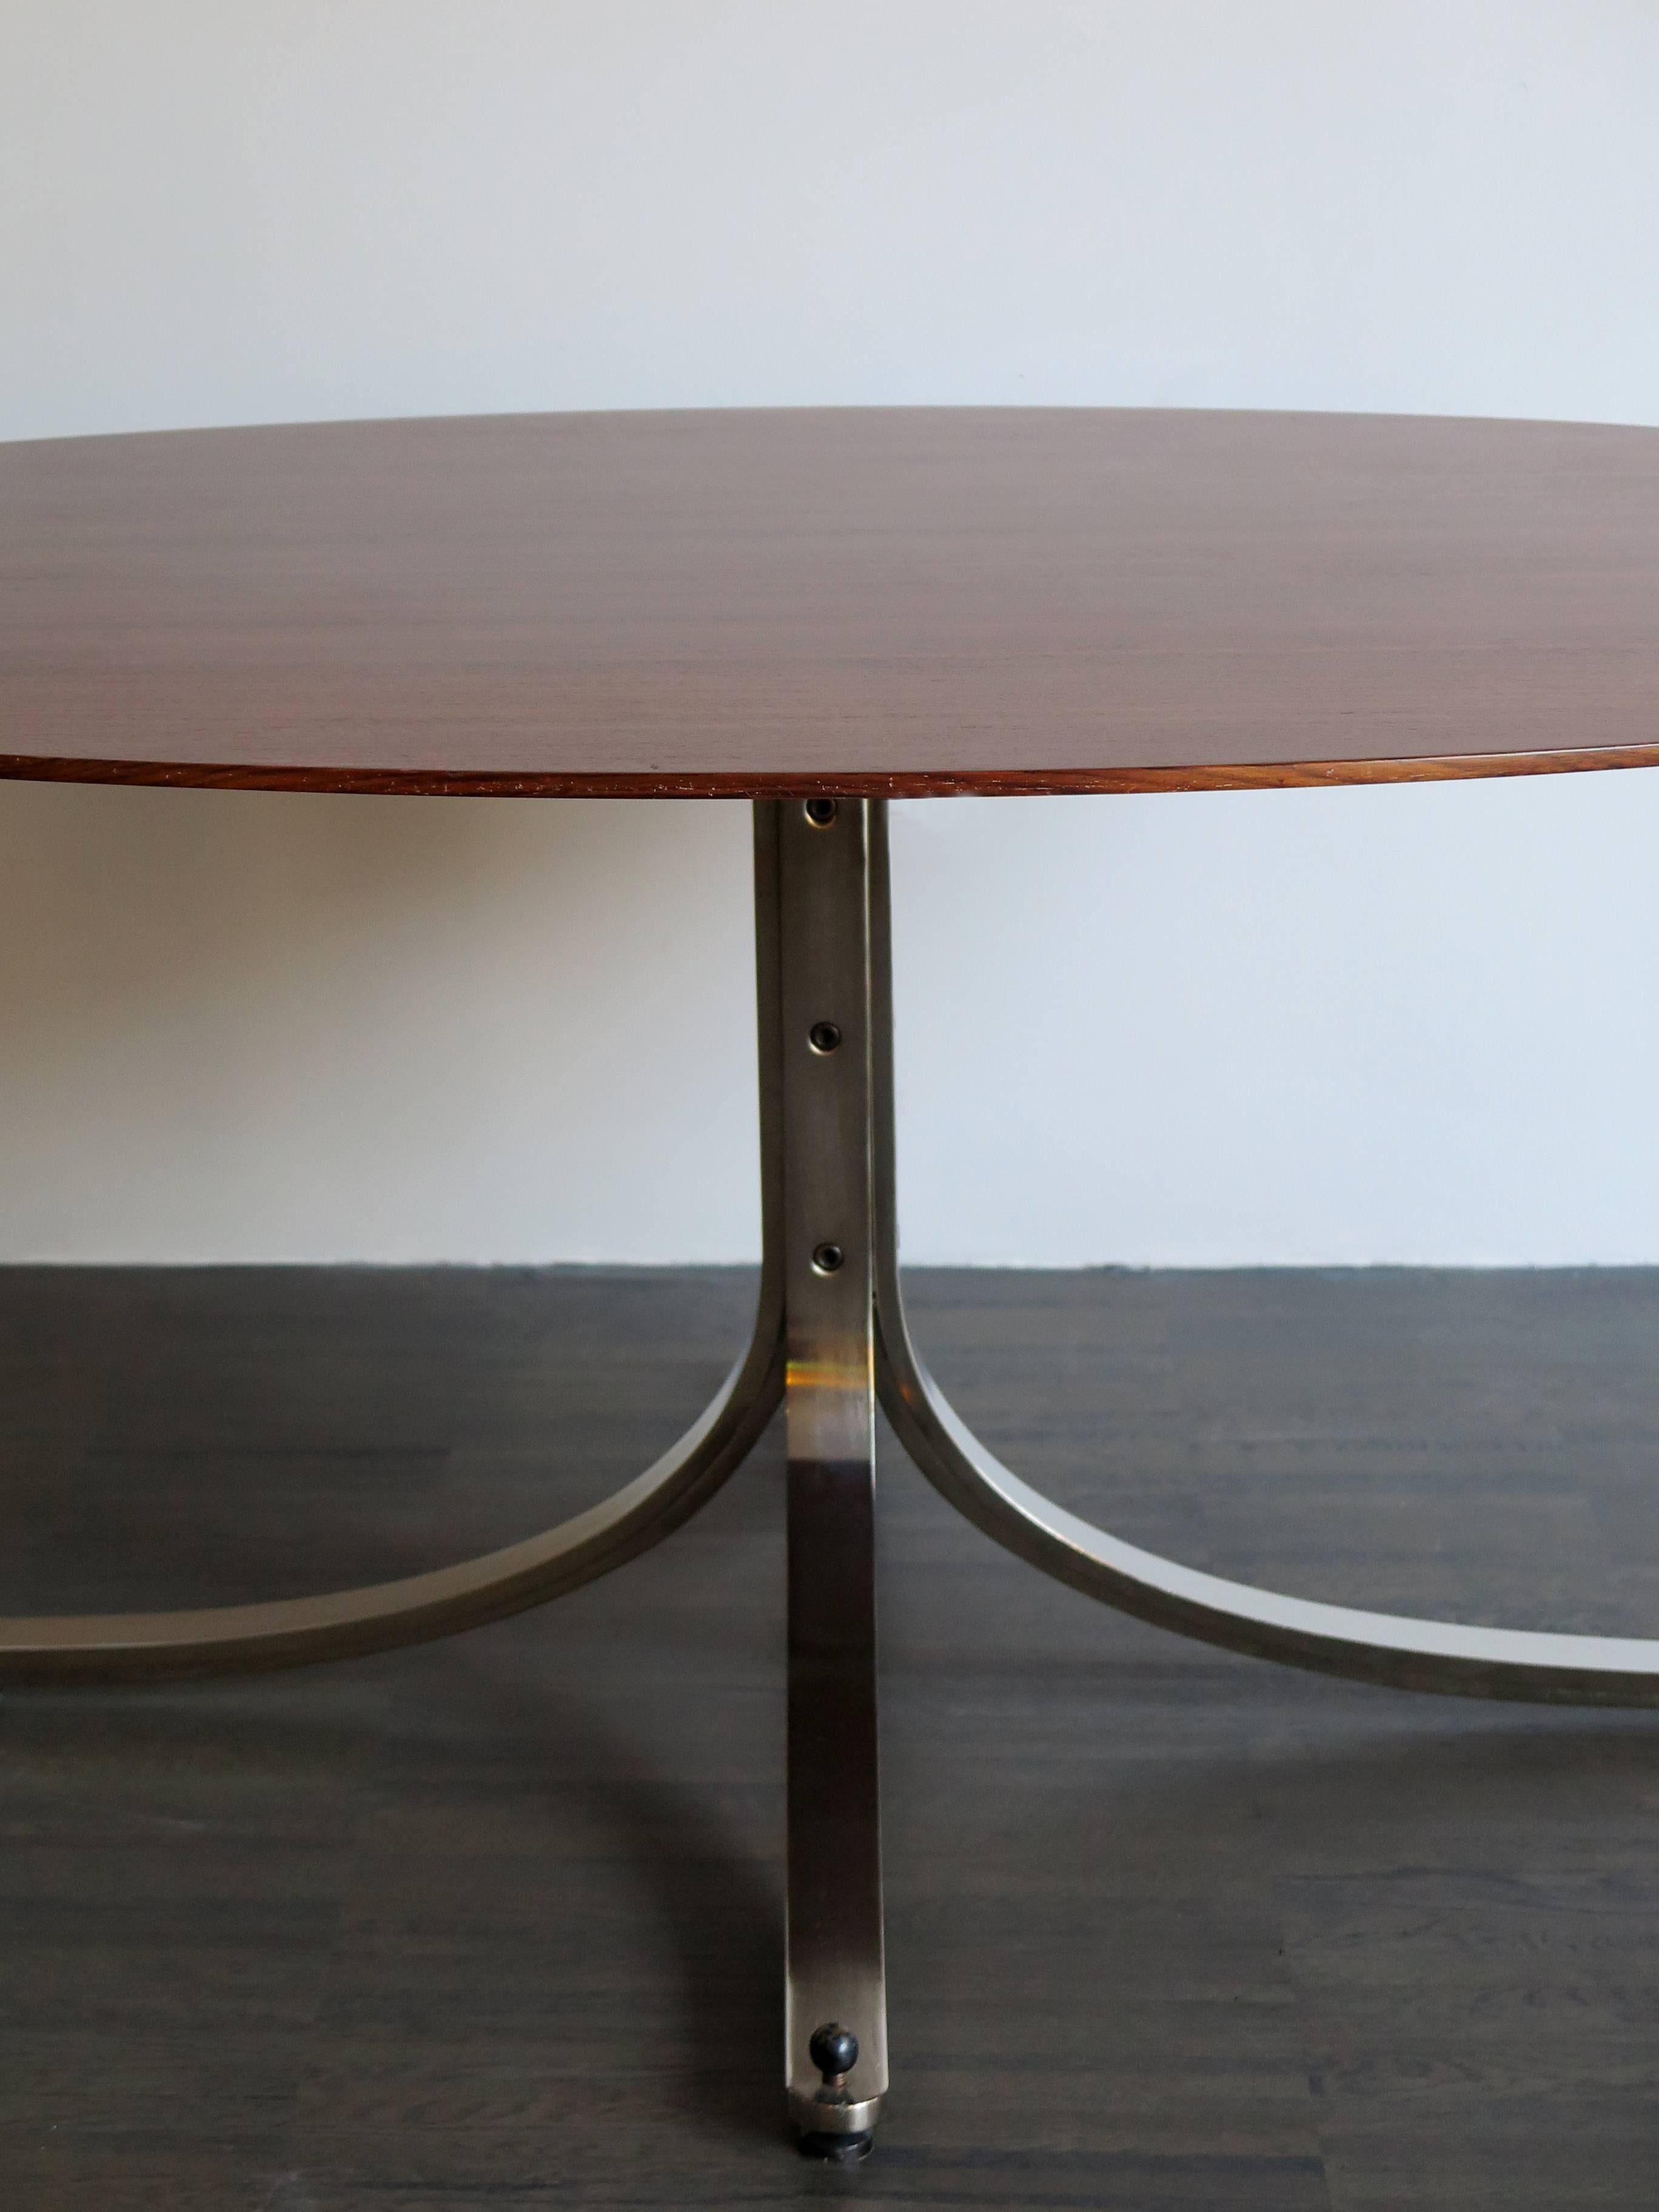 Italian dining table designed by Segio Mazza and manufactured by Arflex in 1962.
Curved stainless steel, adjustable feet, and rosewood veneered top, midcentury design.
Literature sources:
Domus 397 (December 1962), p. 36;
Ottagono 5 (April